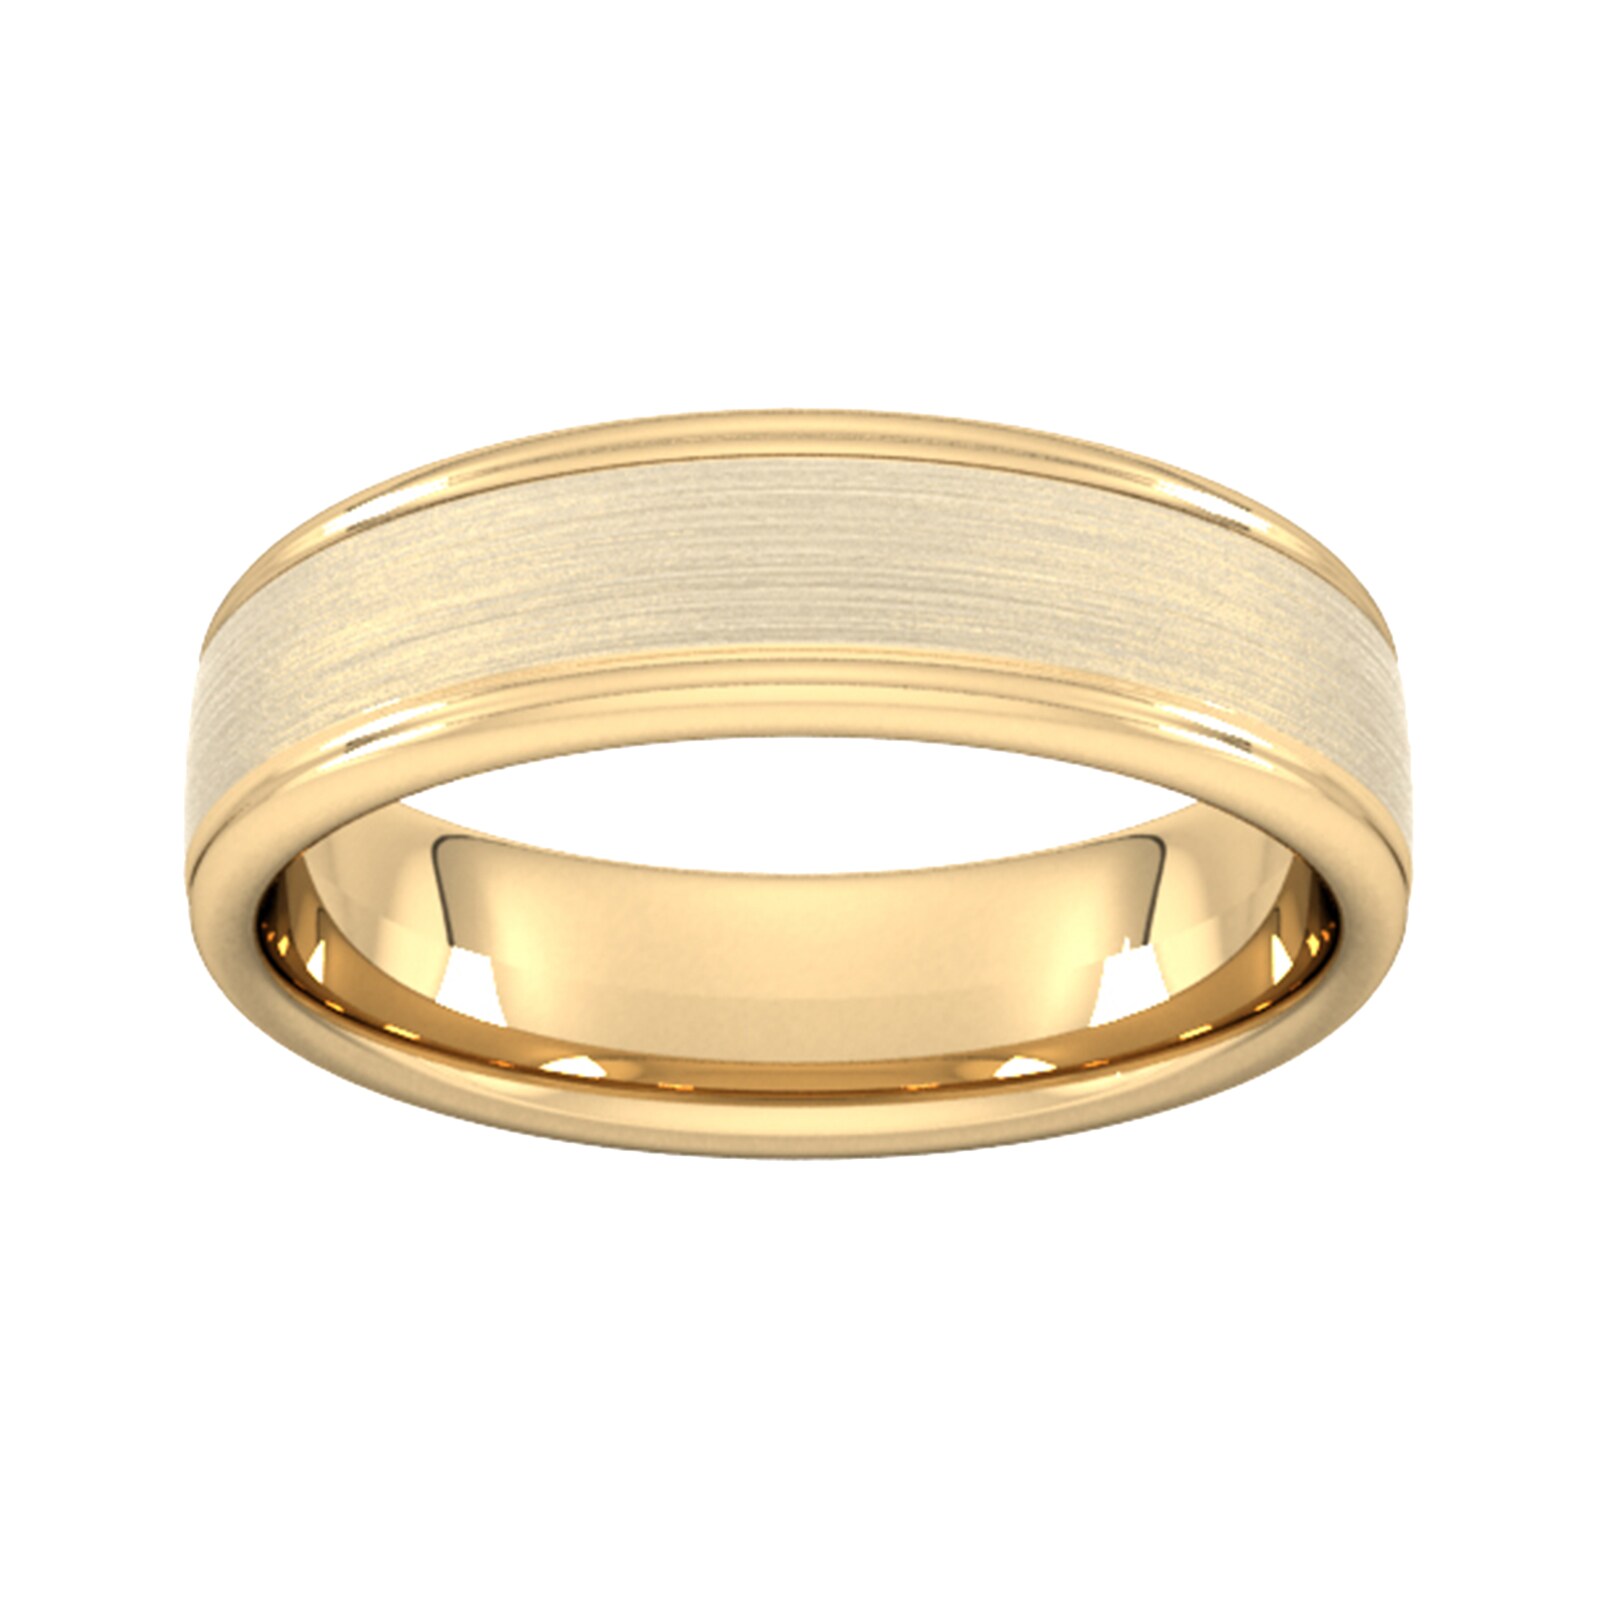 6mm Traditional Court Standard Matt Centre With Grooves Wedding Ring In 9 Carat Yellow Gold - Ring Size R